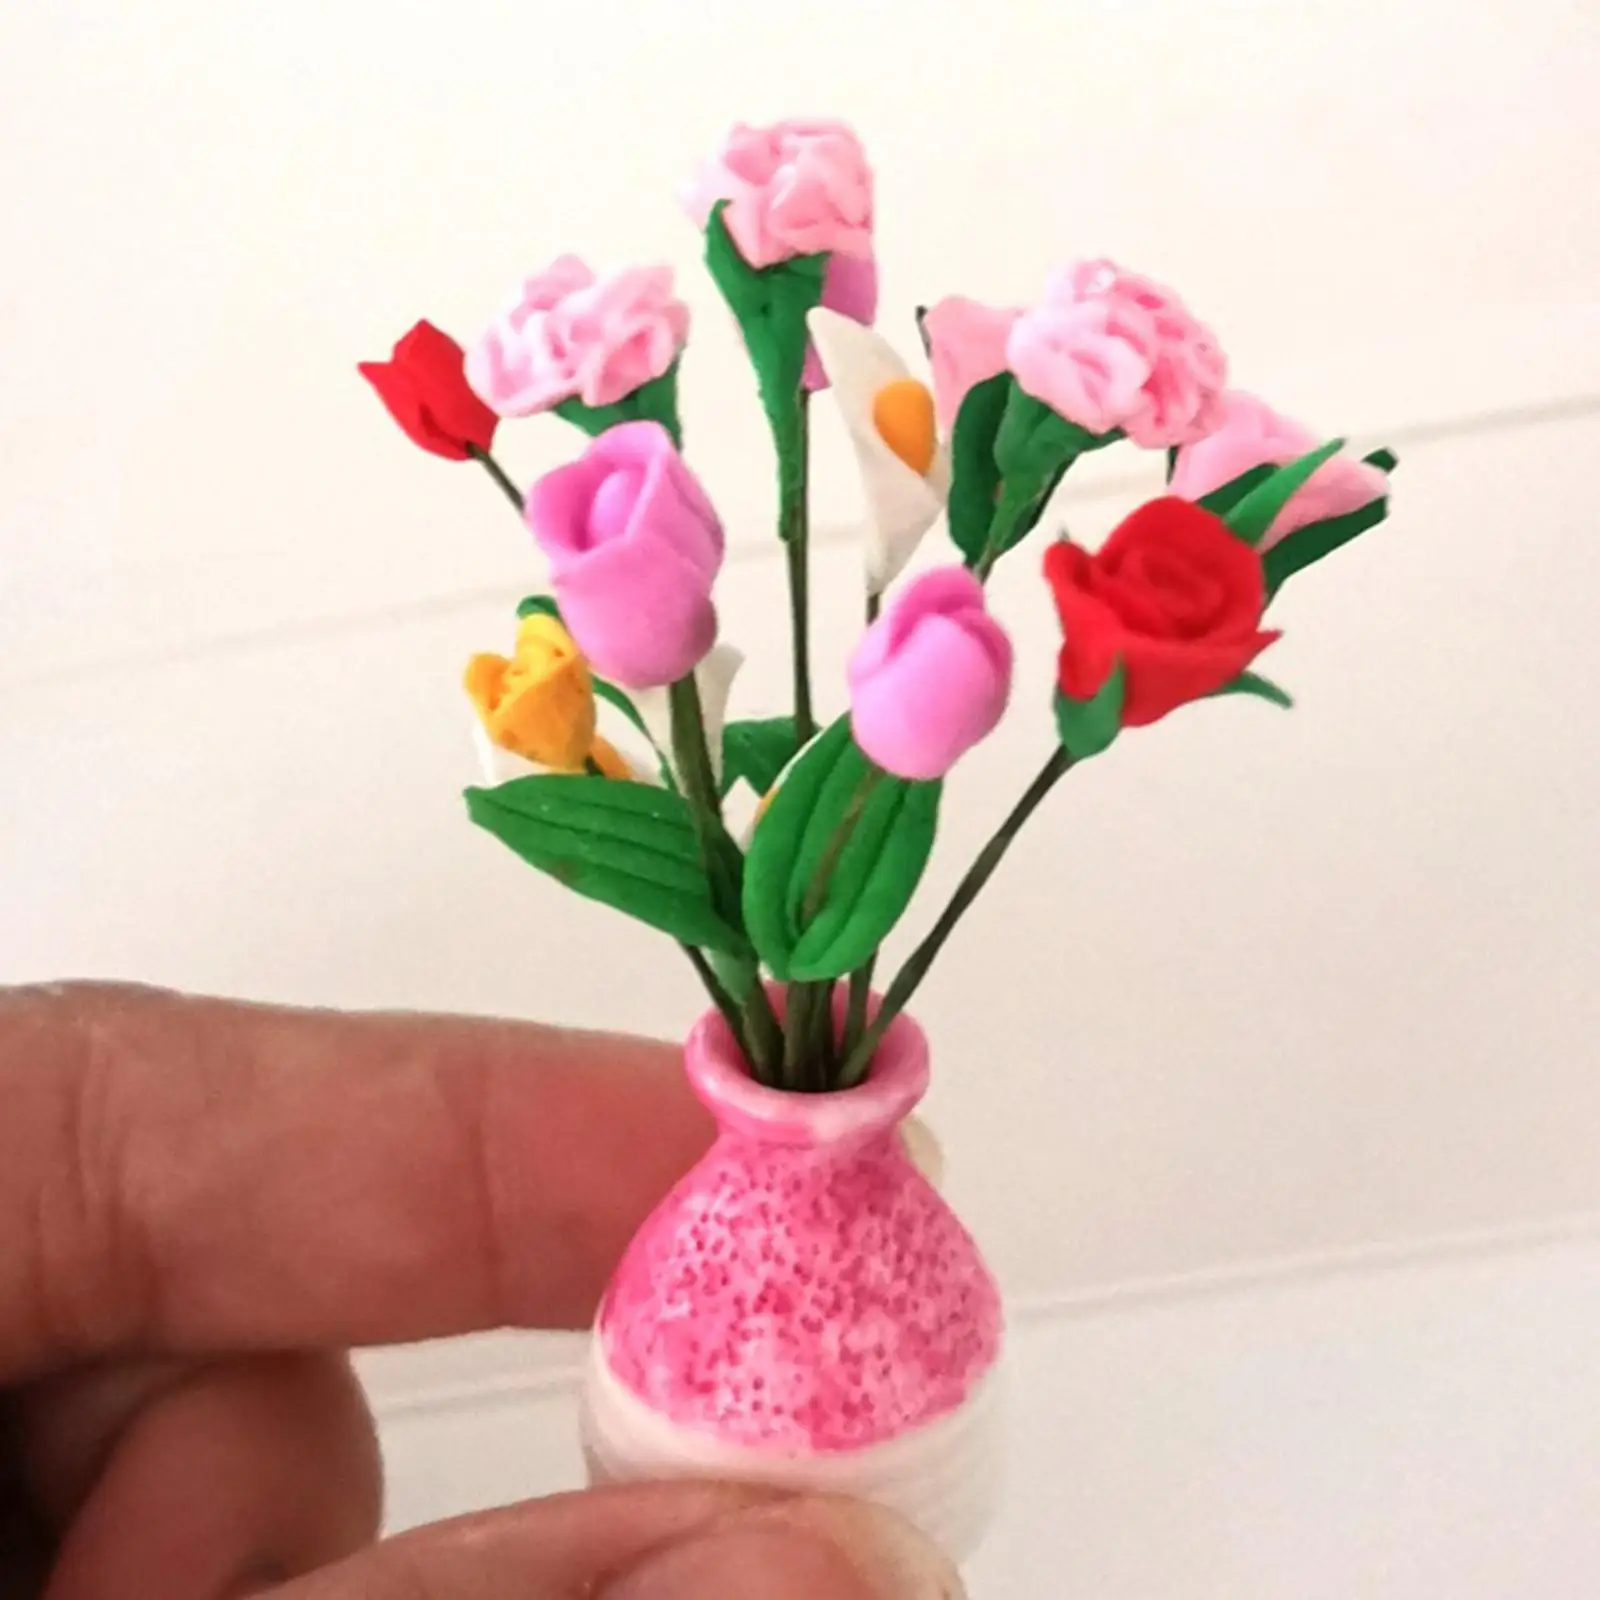 Simulation Mini Potted Plant Tiny Flowers in Pot Pretend 1:12 Scale Dollhouse Flowes for Micro Landscape Gift Ornaments